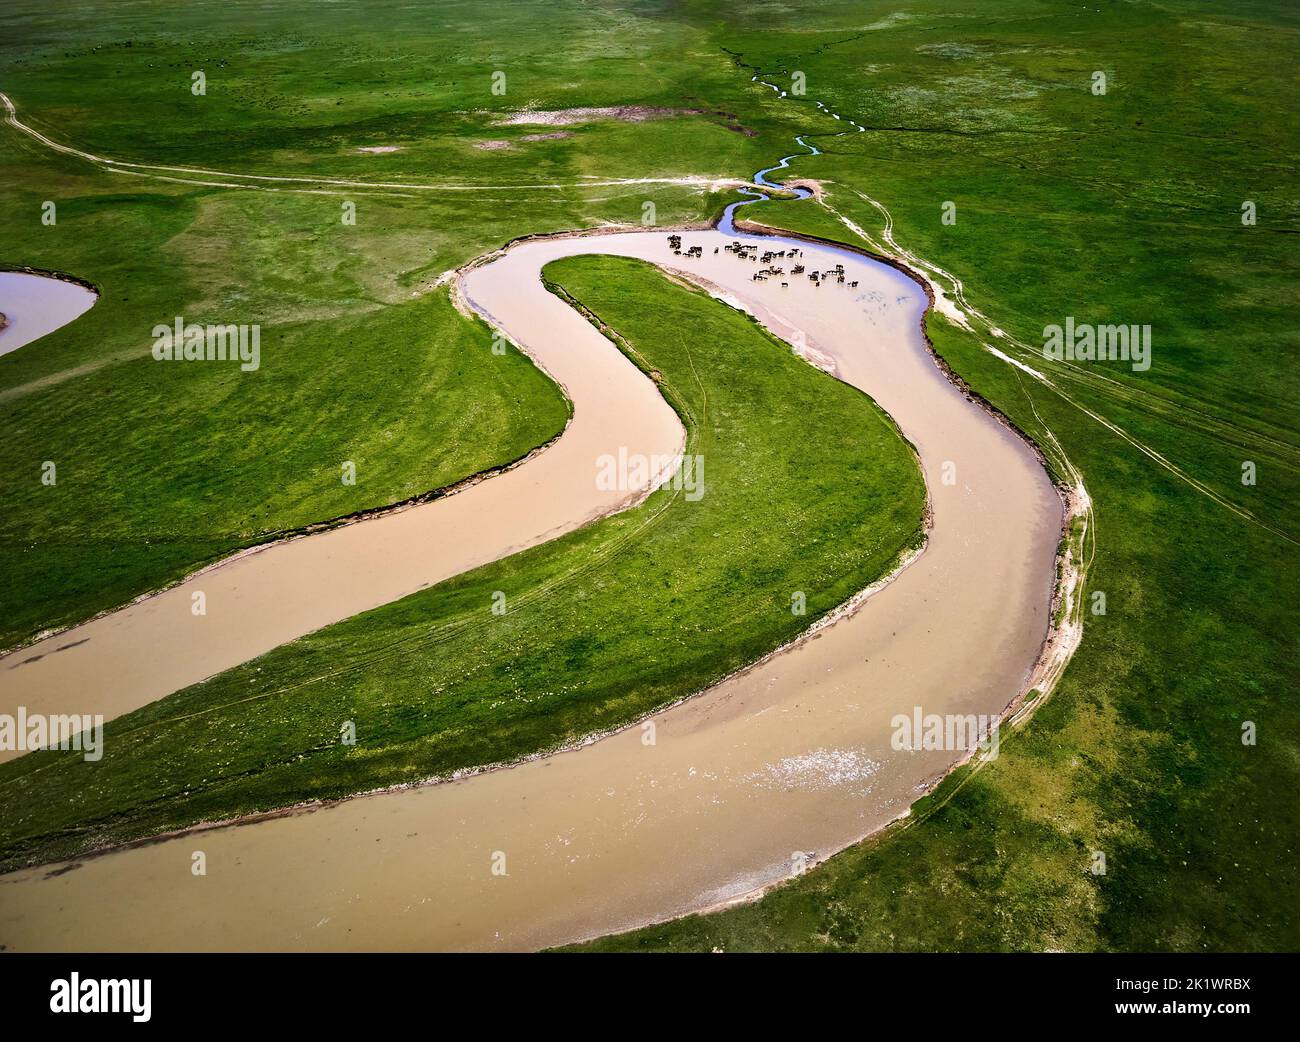 Herd of horses drink water from the river. Aerial drone shot of beautiful scenery curve river Kegen with green hills in Mountain valley, Kazakhstan. Stock Photo